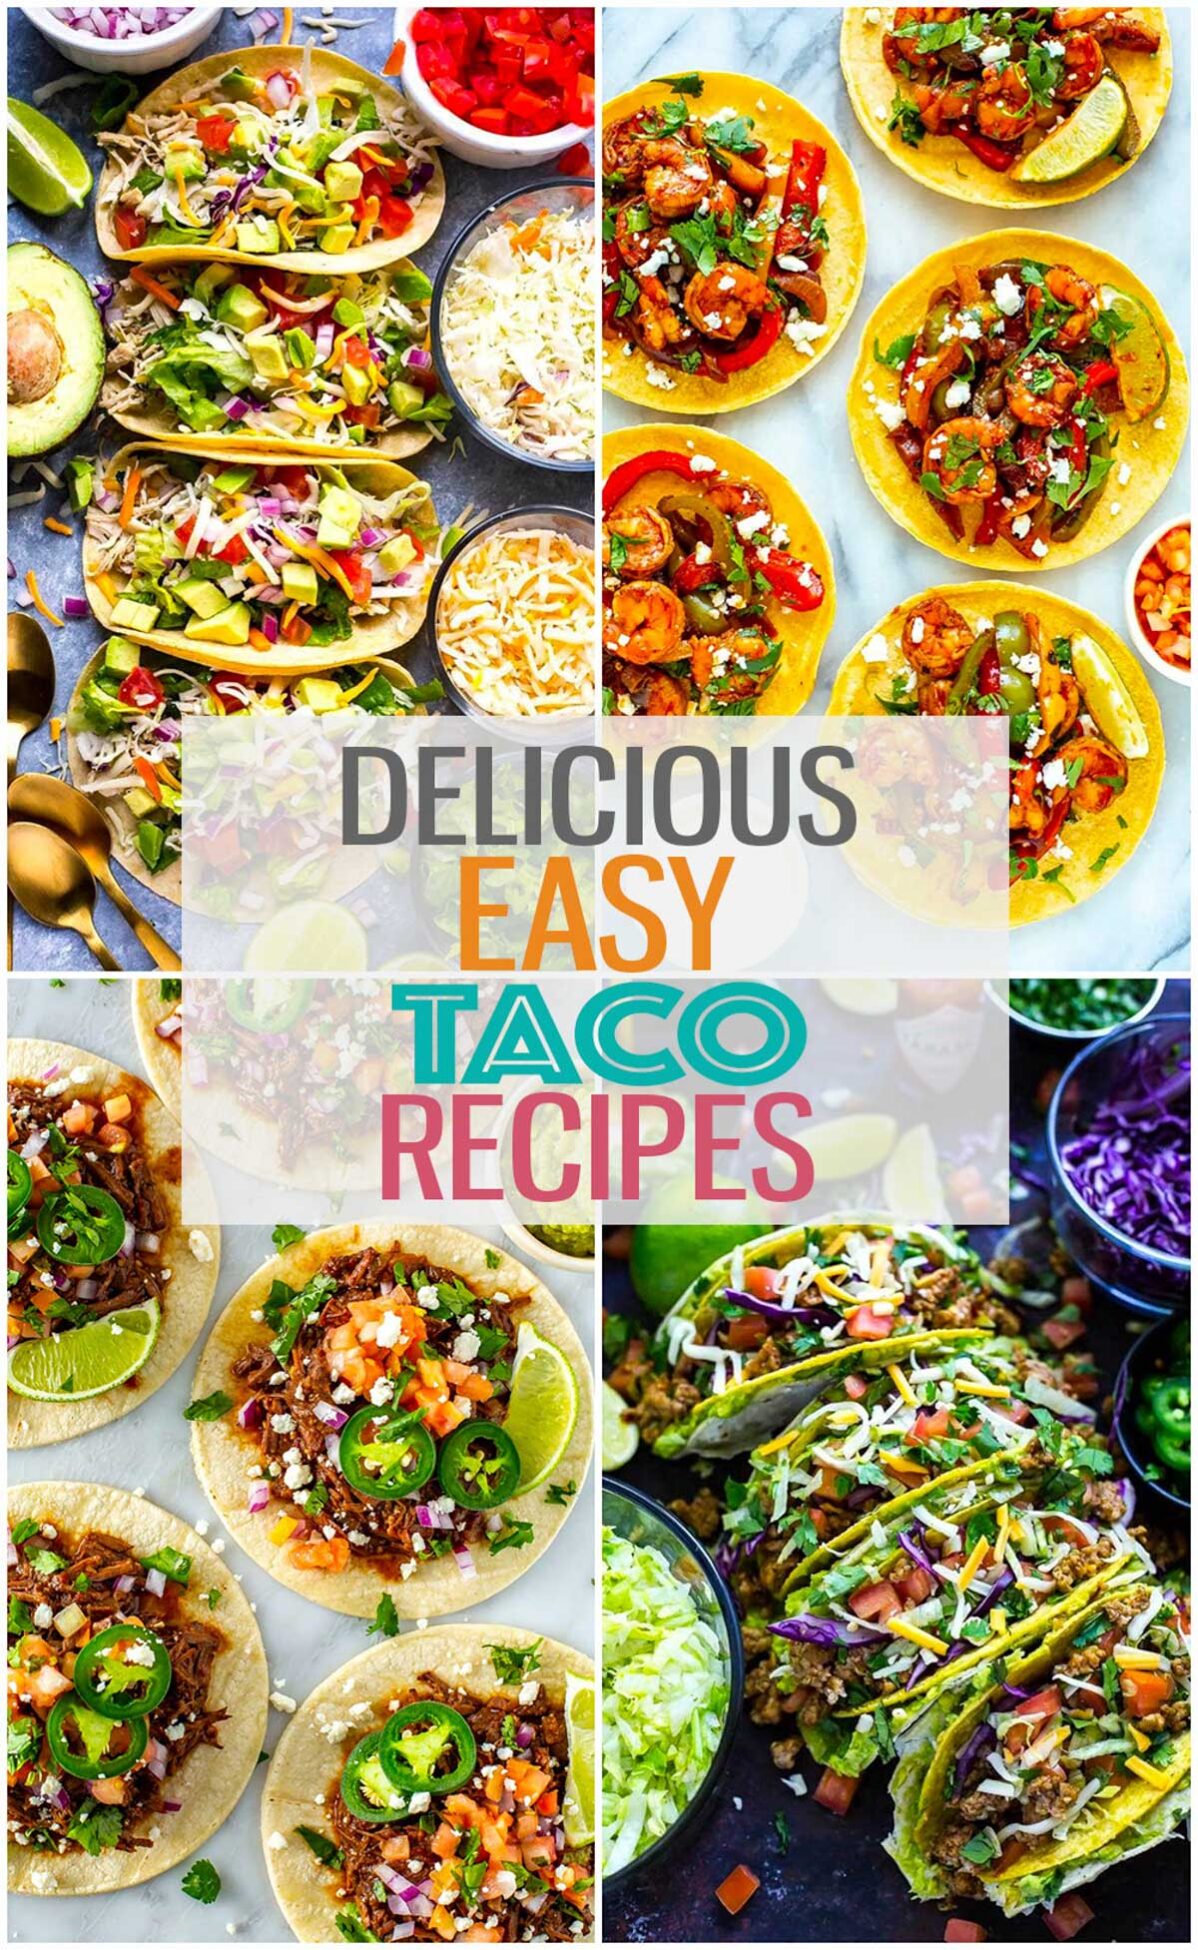 A collage of four different taco recipes with the text "Delicious Easy Taco Recipes" layered over top.